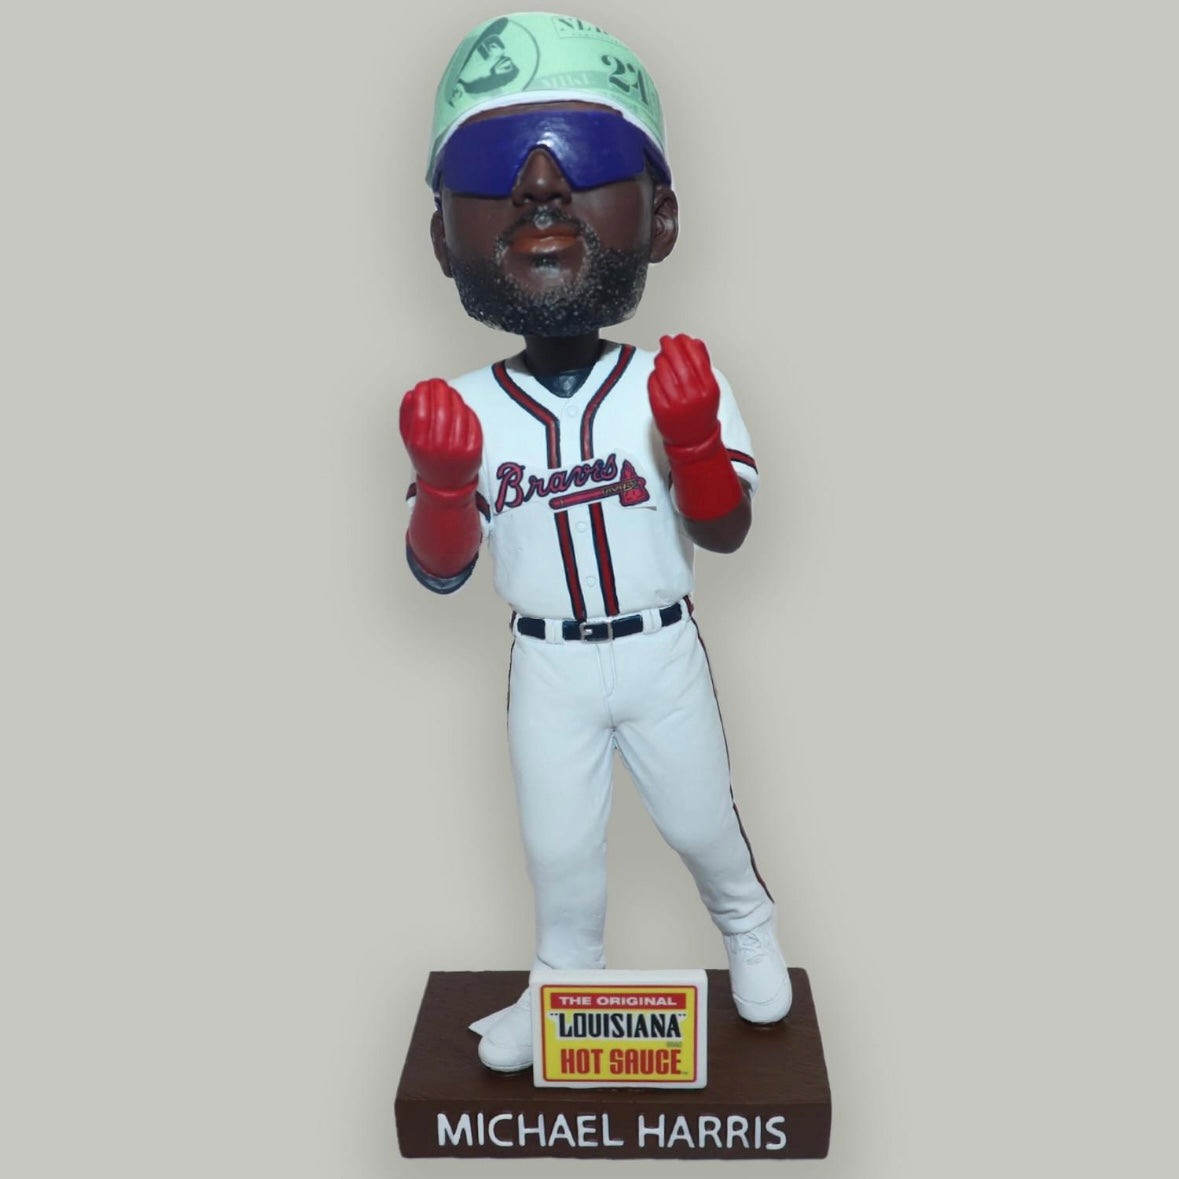 Michael Harris II jerseys and player tees are in STOCK! Check out